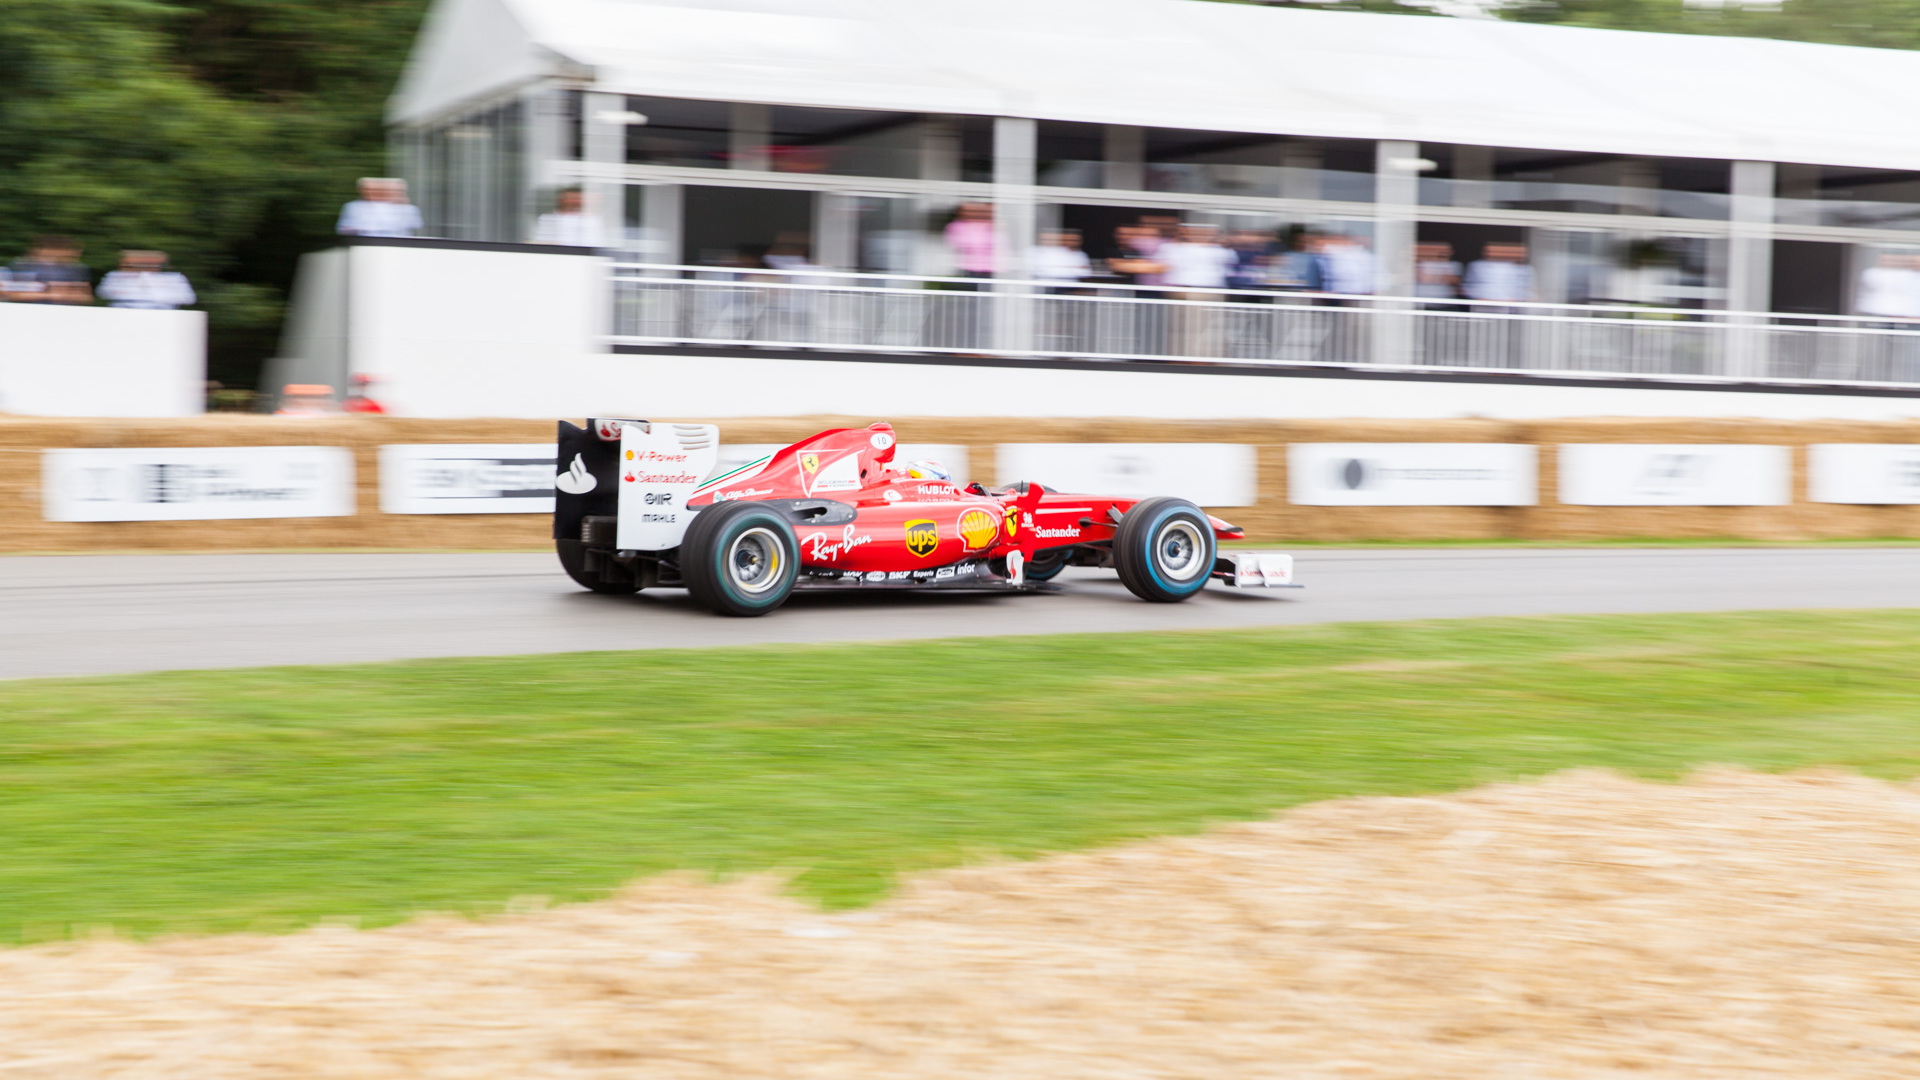 2017 Goodwood Festival of Speed-Day 2